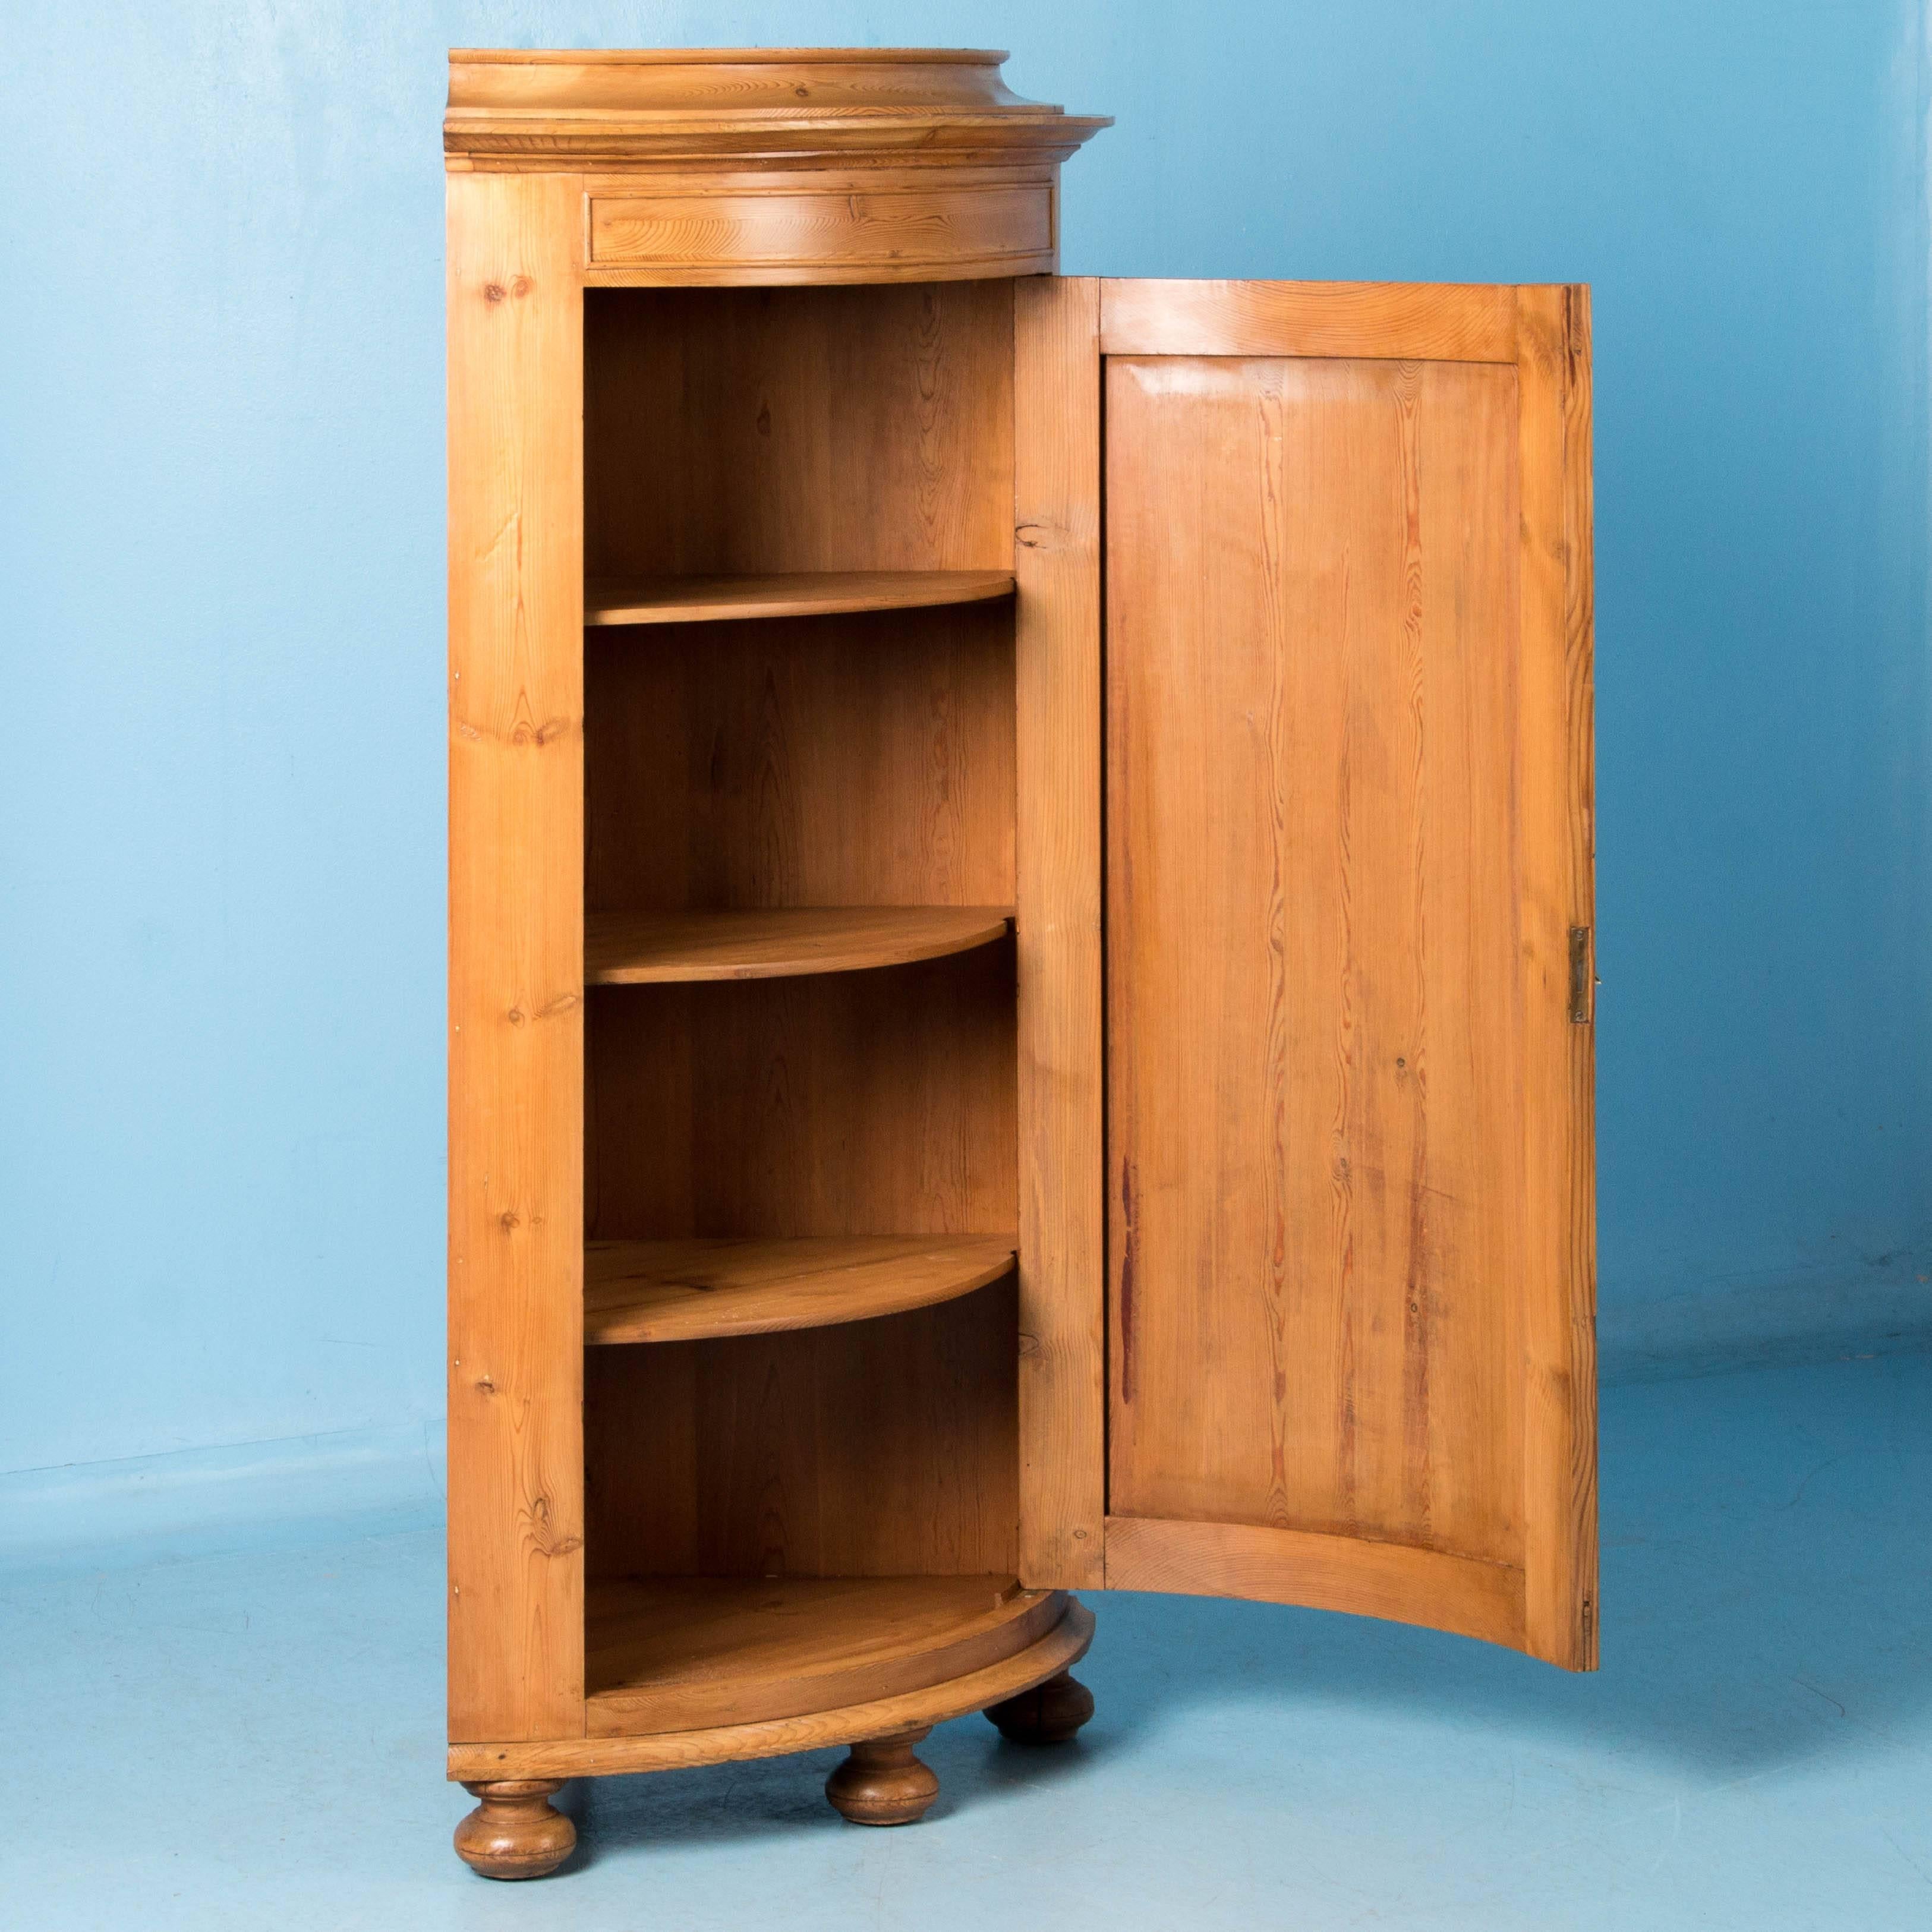 Bow front pine corner cabinet with three shelves inside featuring a single door, a large molded crown and bun feet. The cabinet has a satin wax finish which enhances the color and patina. Please take a moment to enlarge the photos and examine the